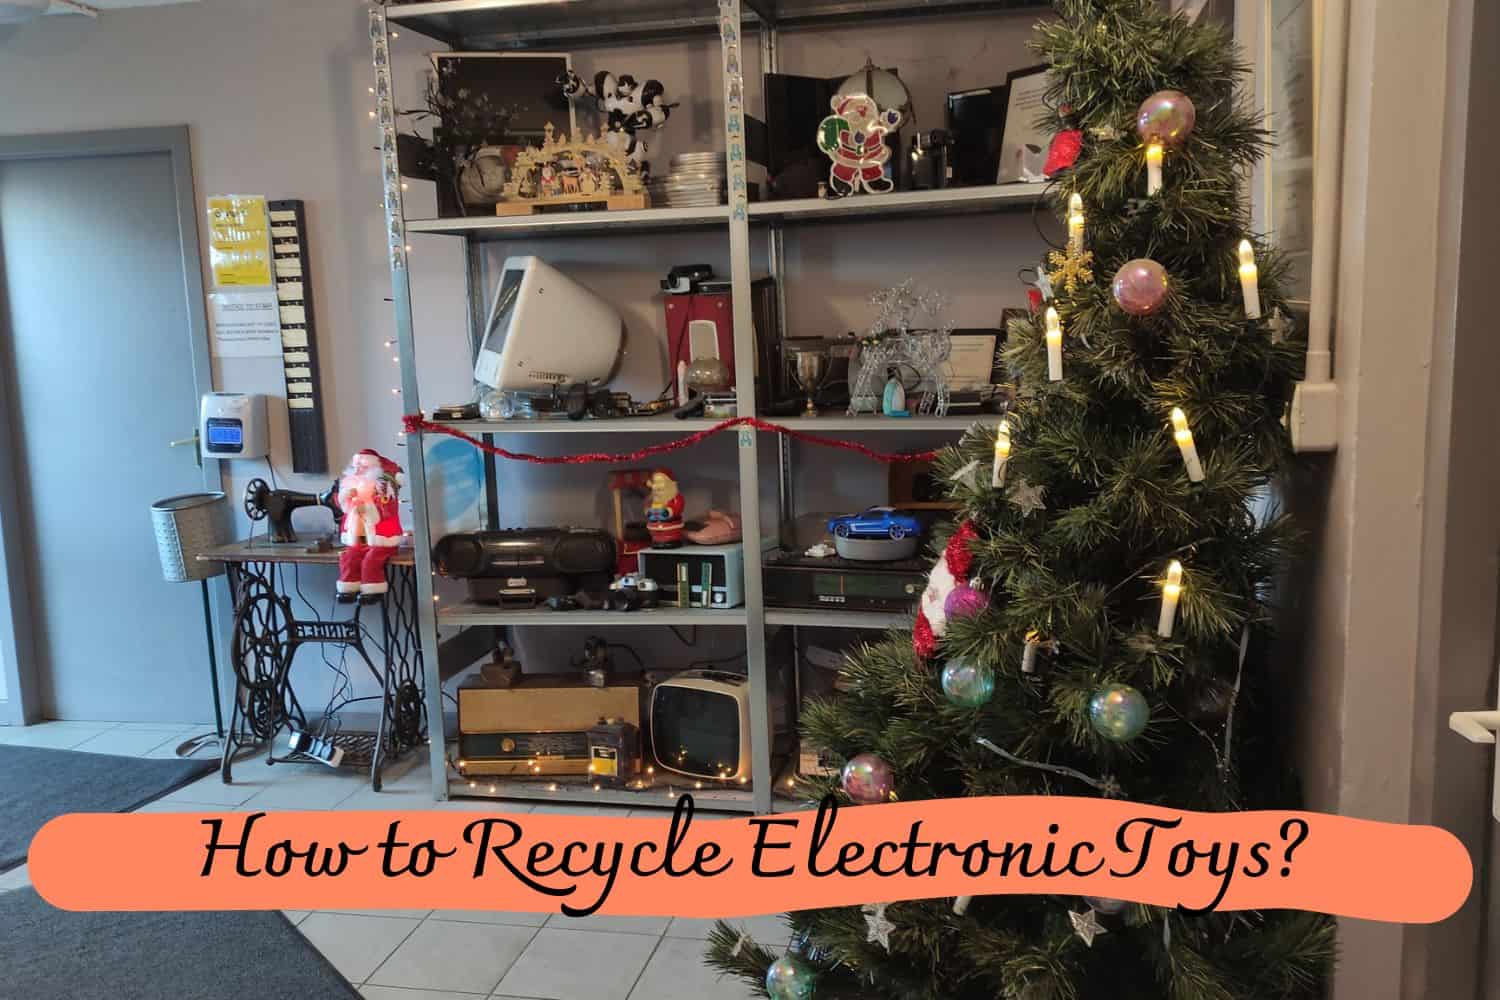 How to Recycle Electronic Toys